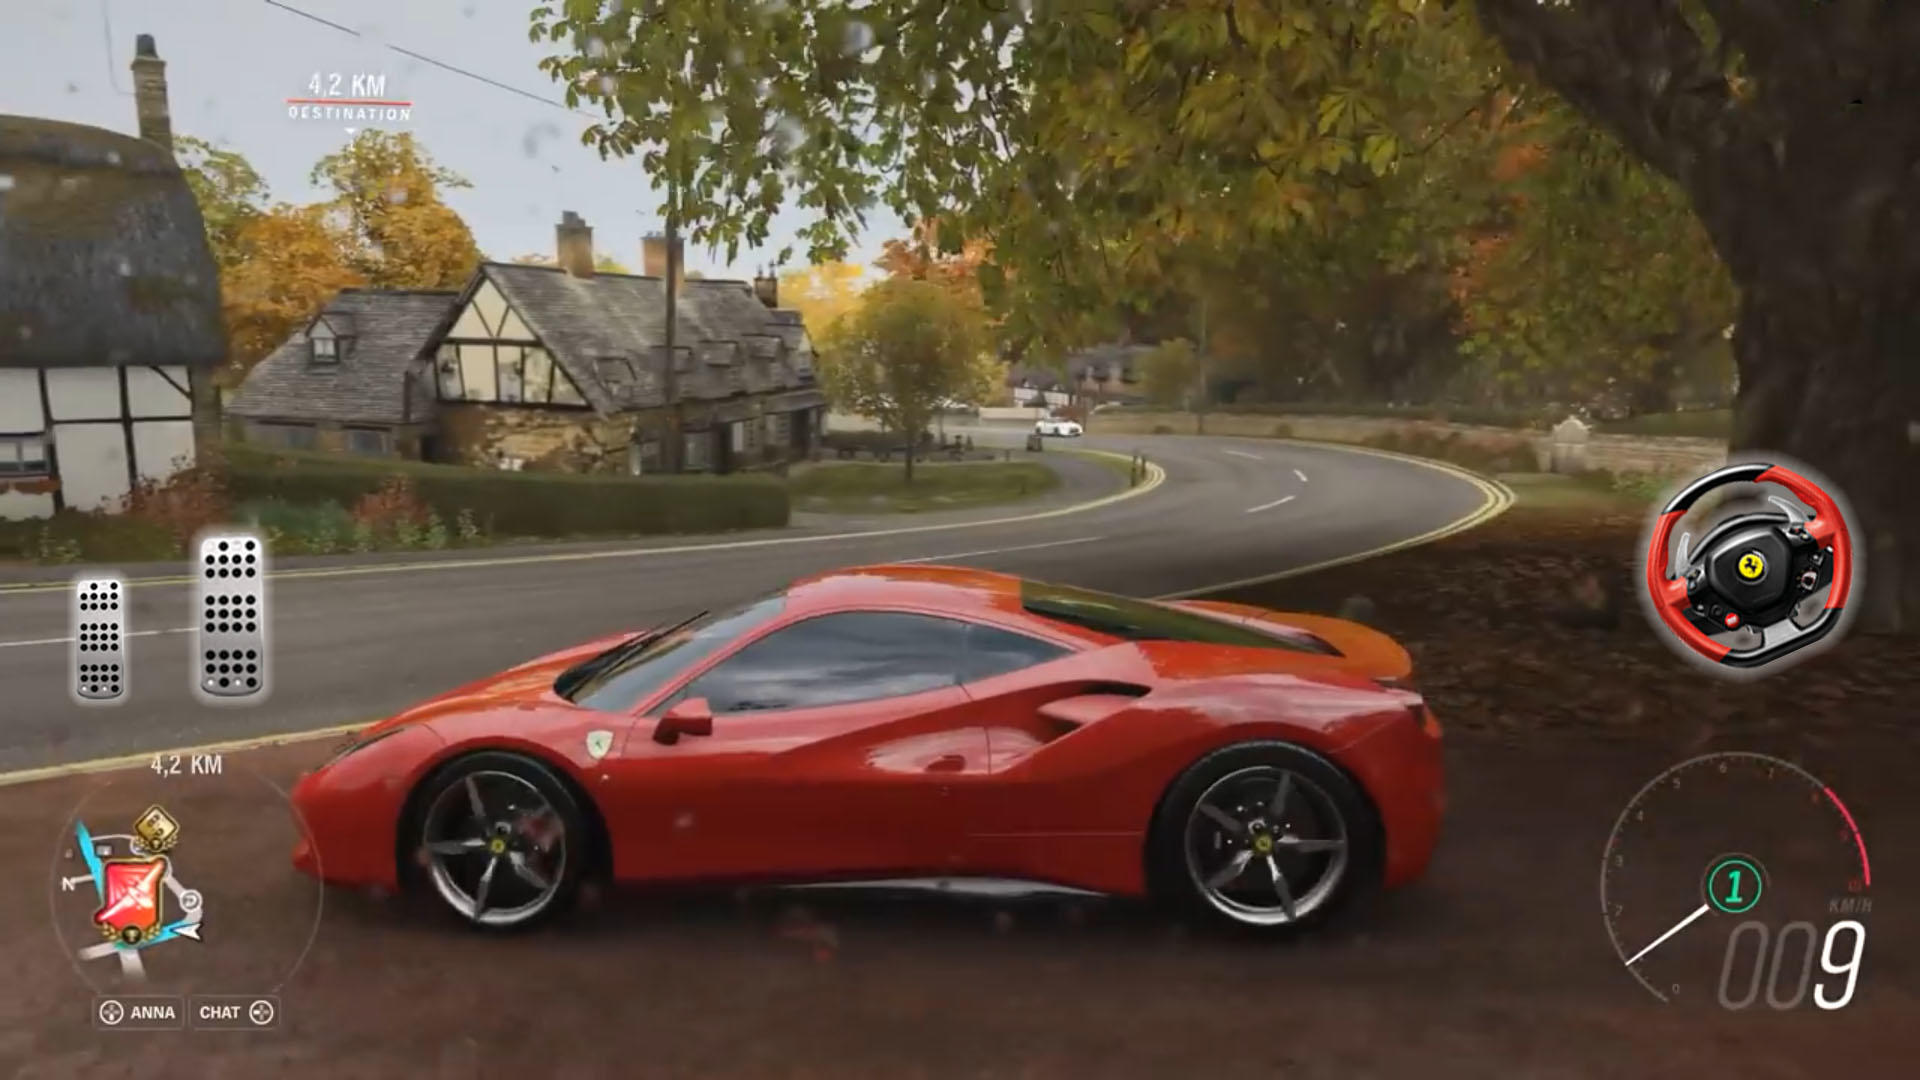 Forza Horizon 5 APK Download For Android - (MOD Version) 2023